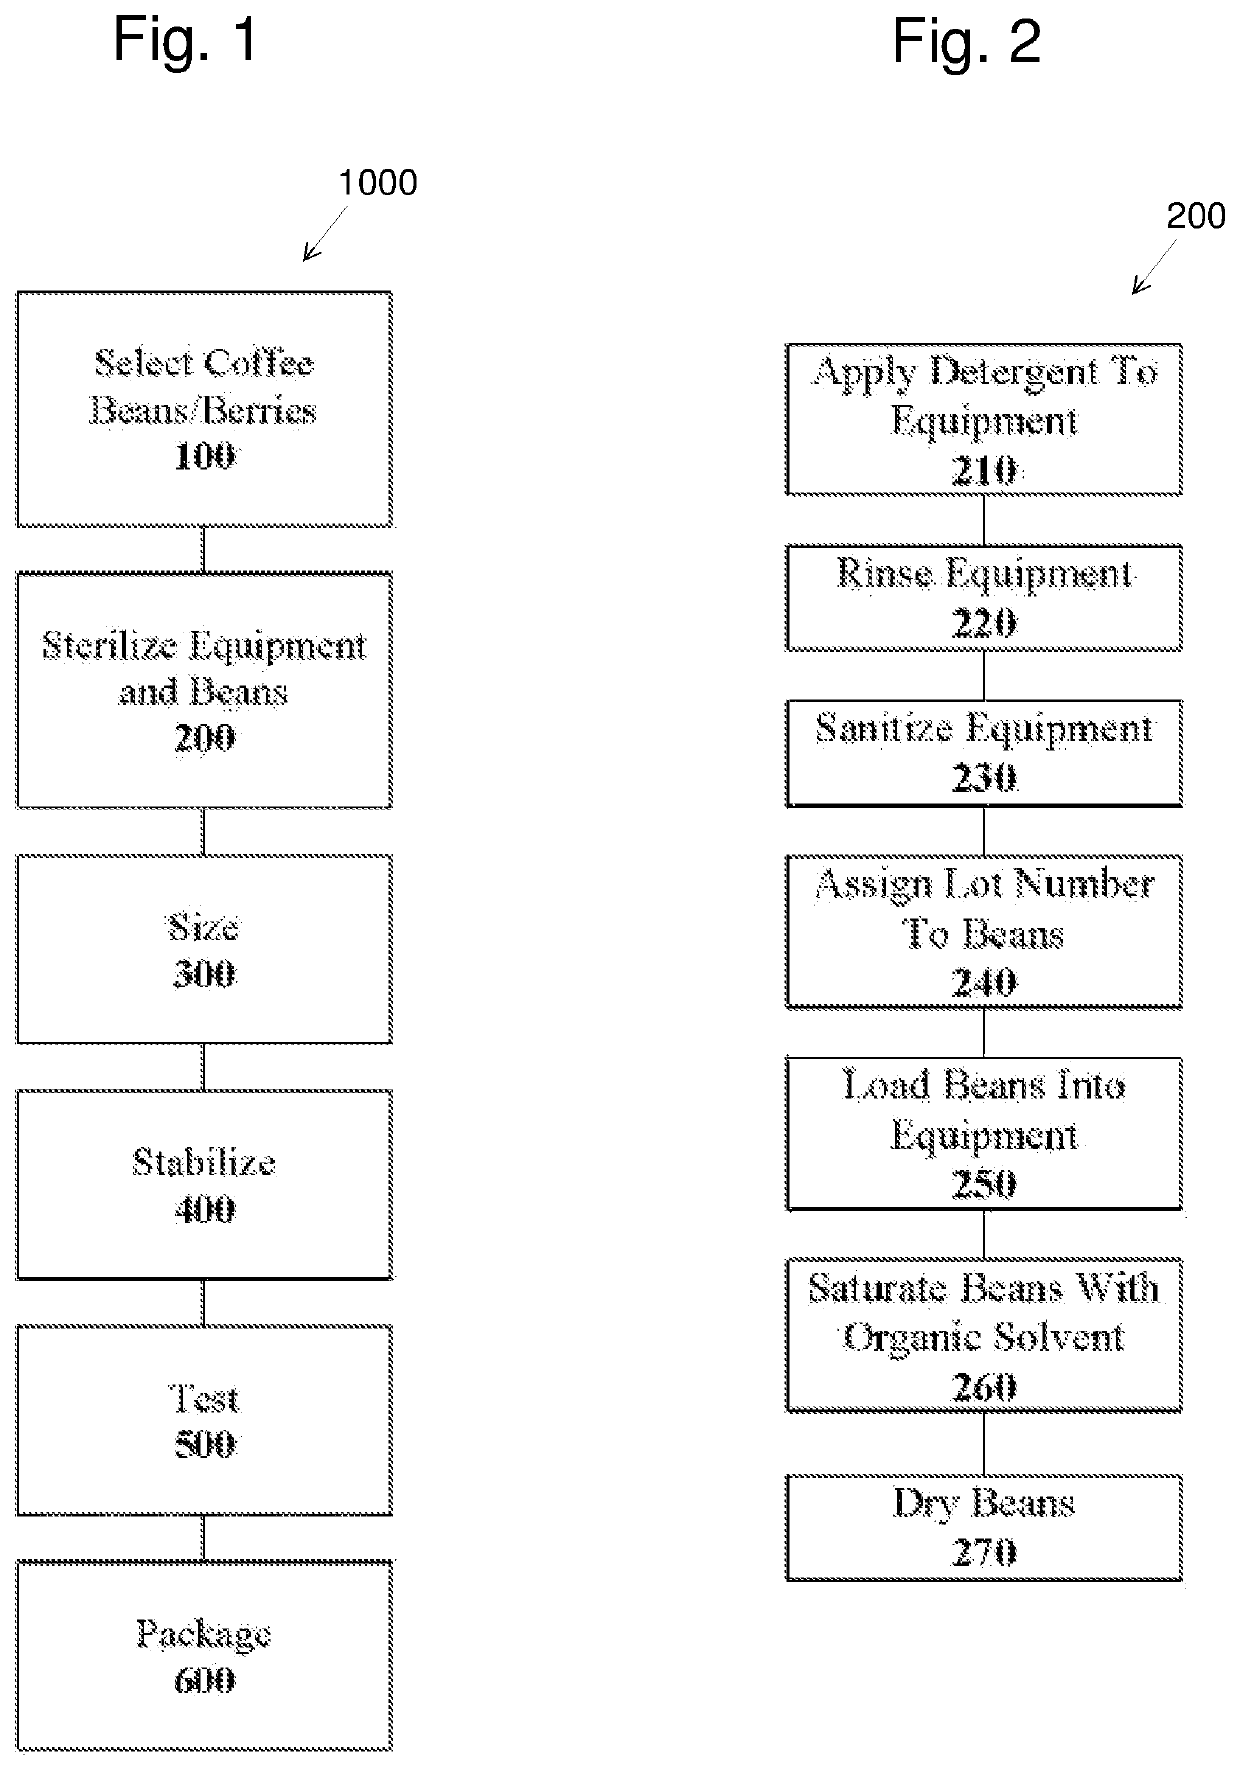 Compositions of whole green coffee bean products and whole hemp products